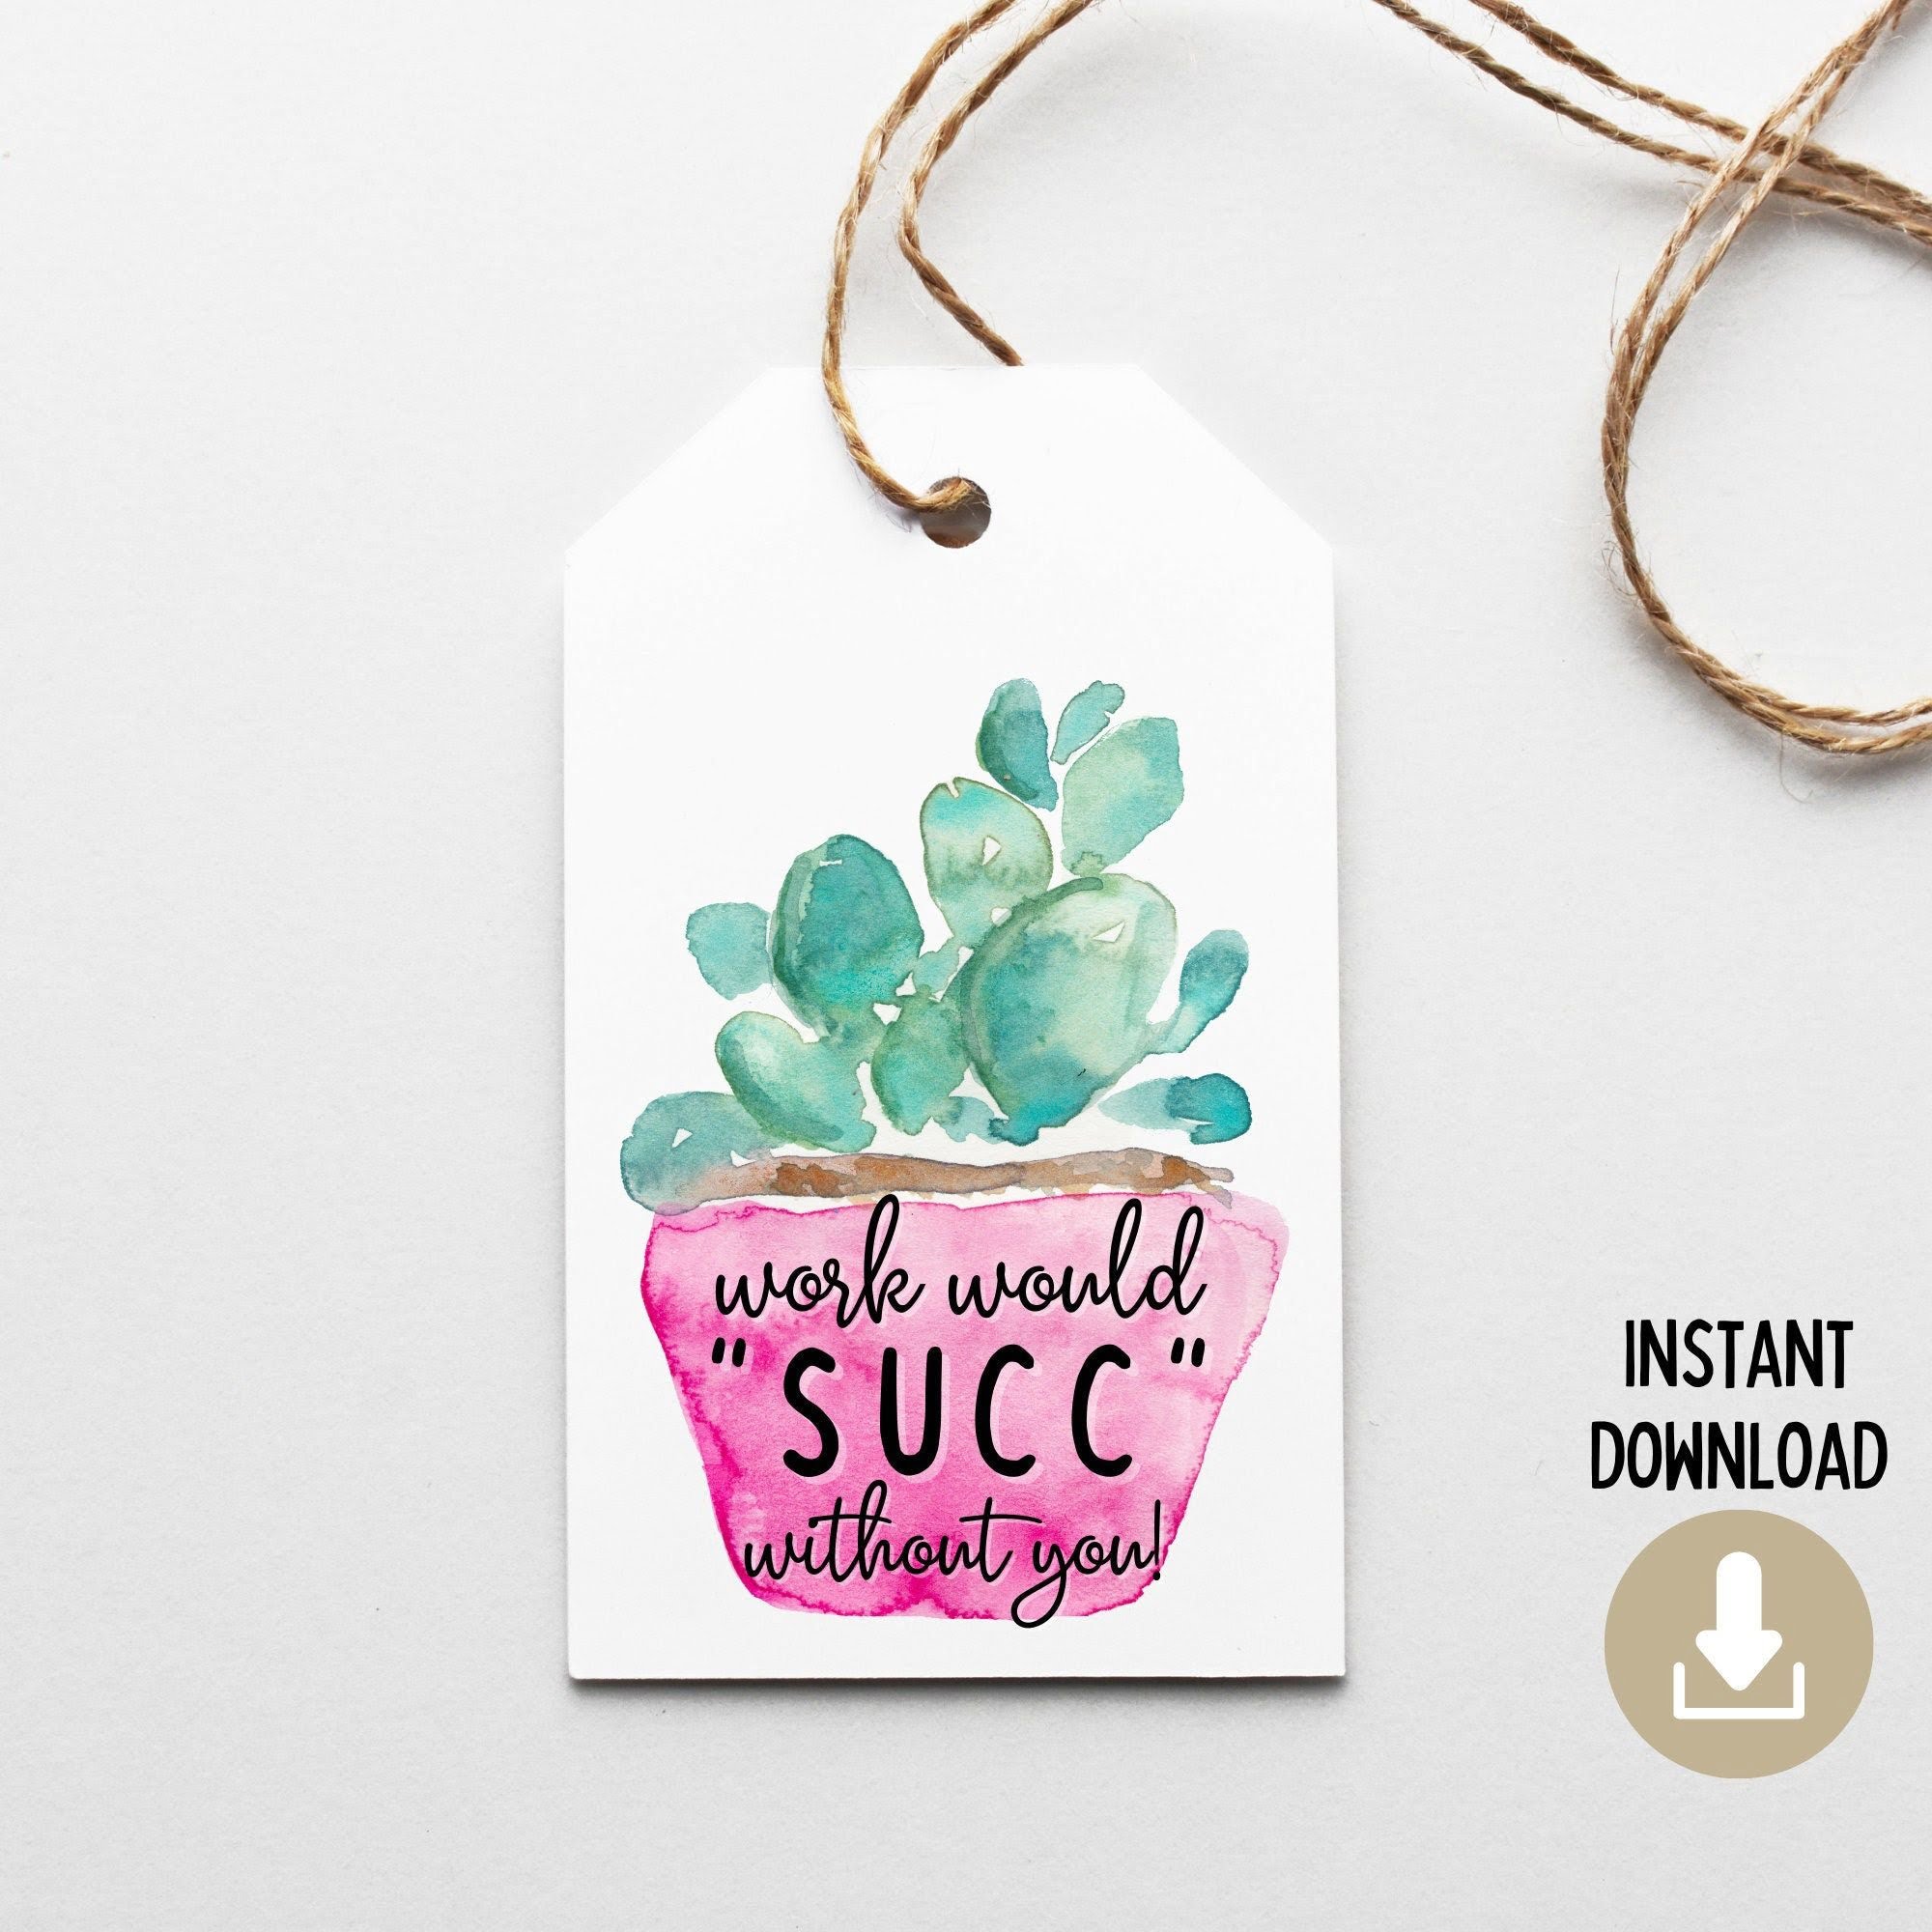 work-would-succ-without-you-printable-free-printable